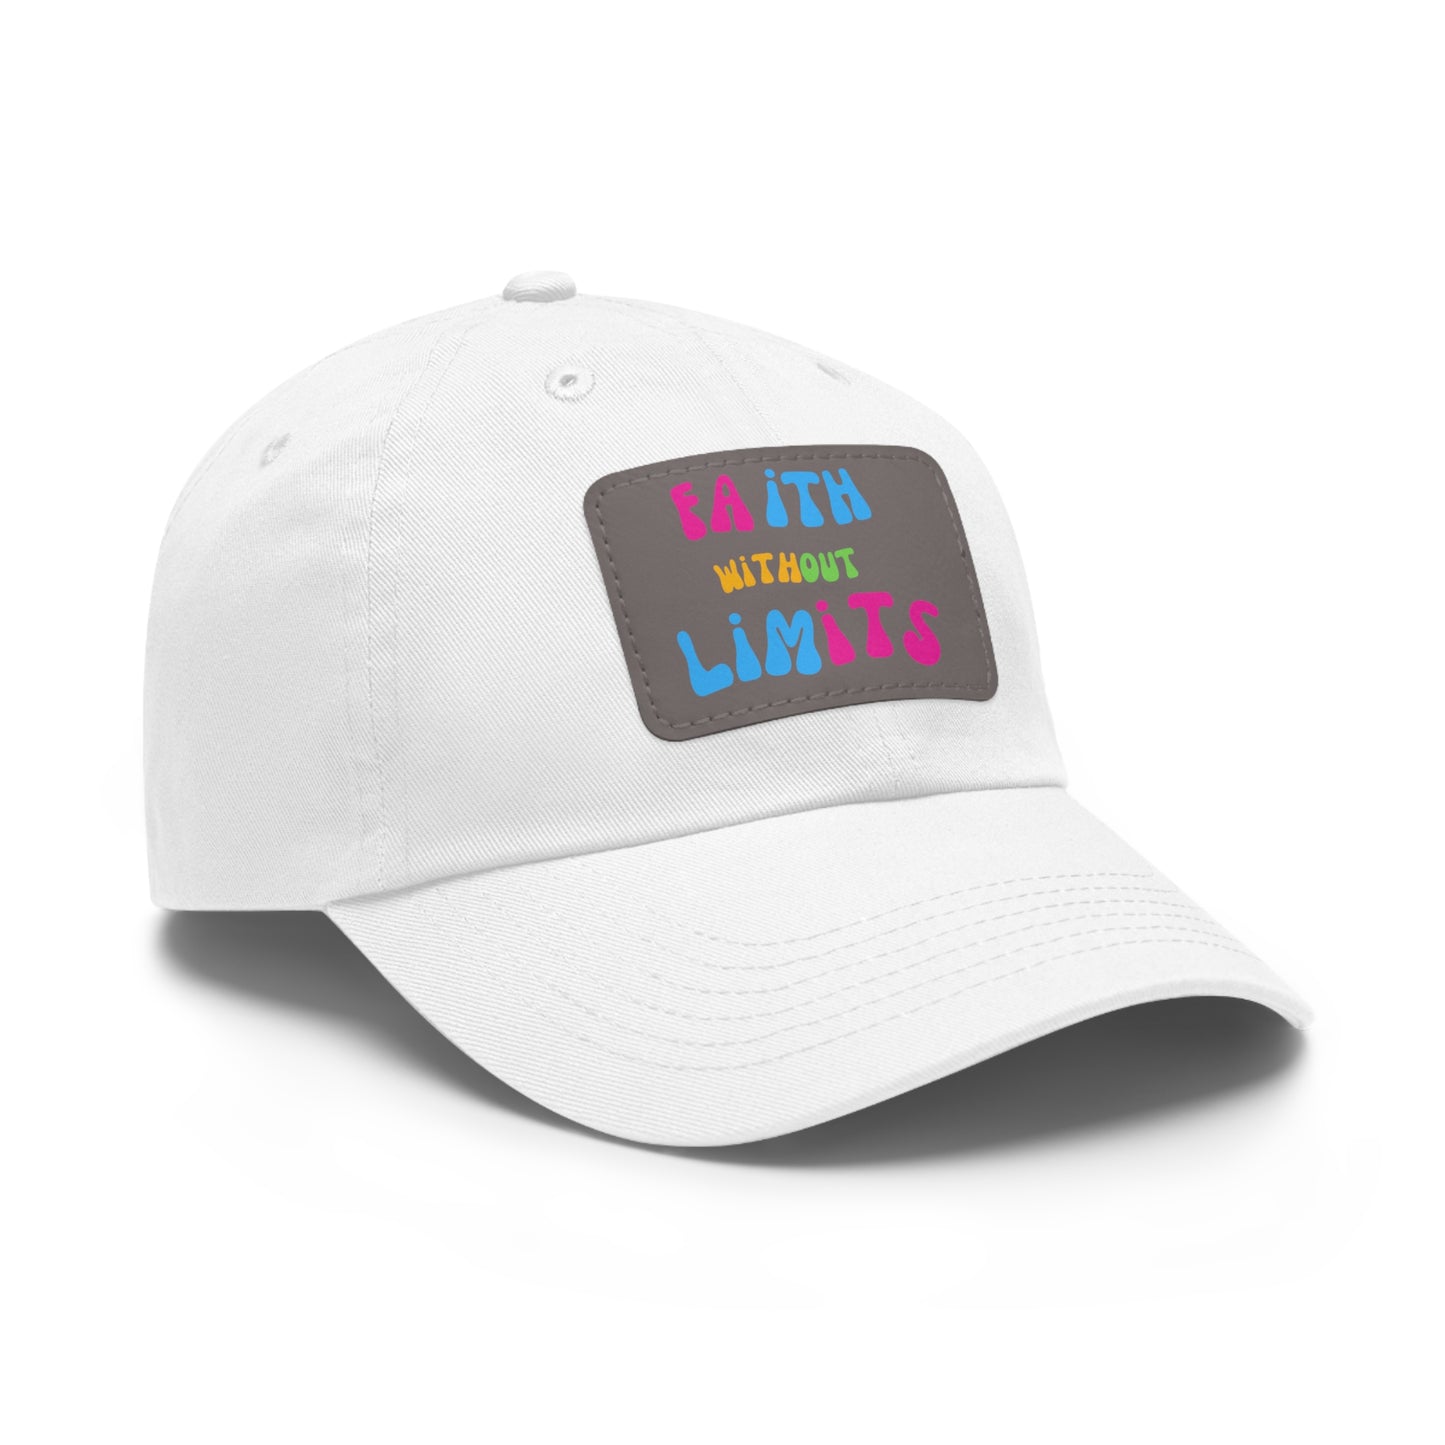 "WITHOUT LIMITS" Dad Cap with Leather Patch